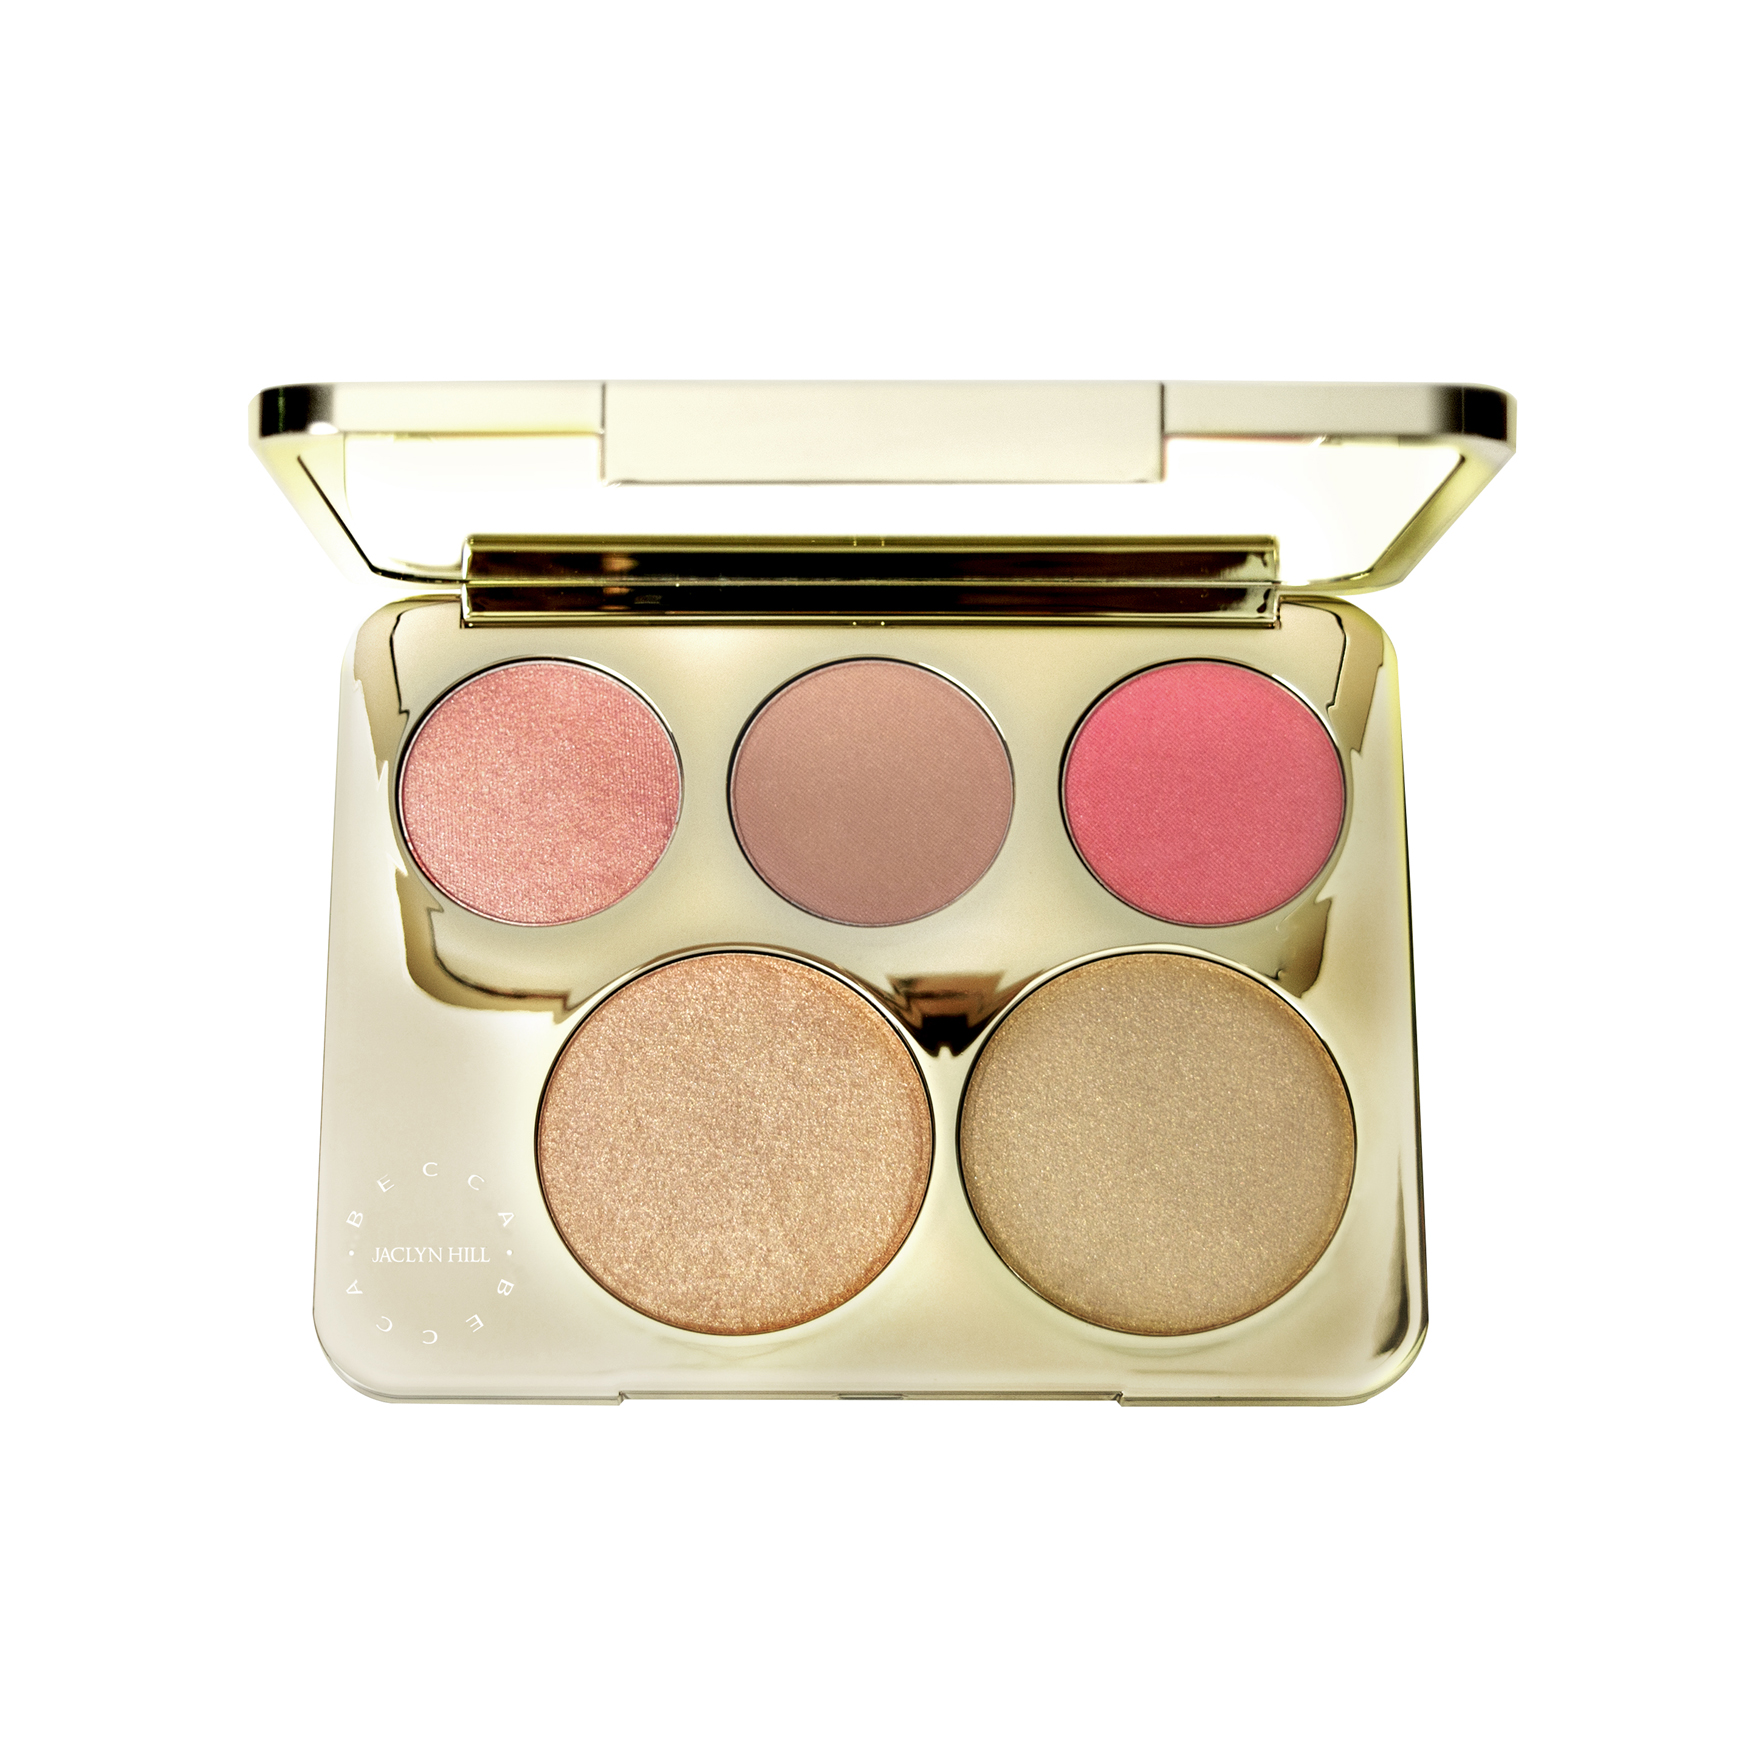 Becca Jaclyn Hill Champagne Collection Face Palette | Space NK